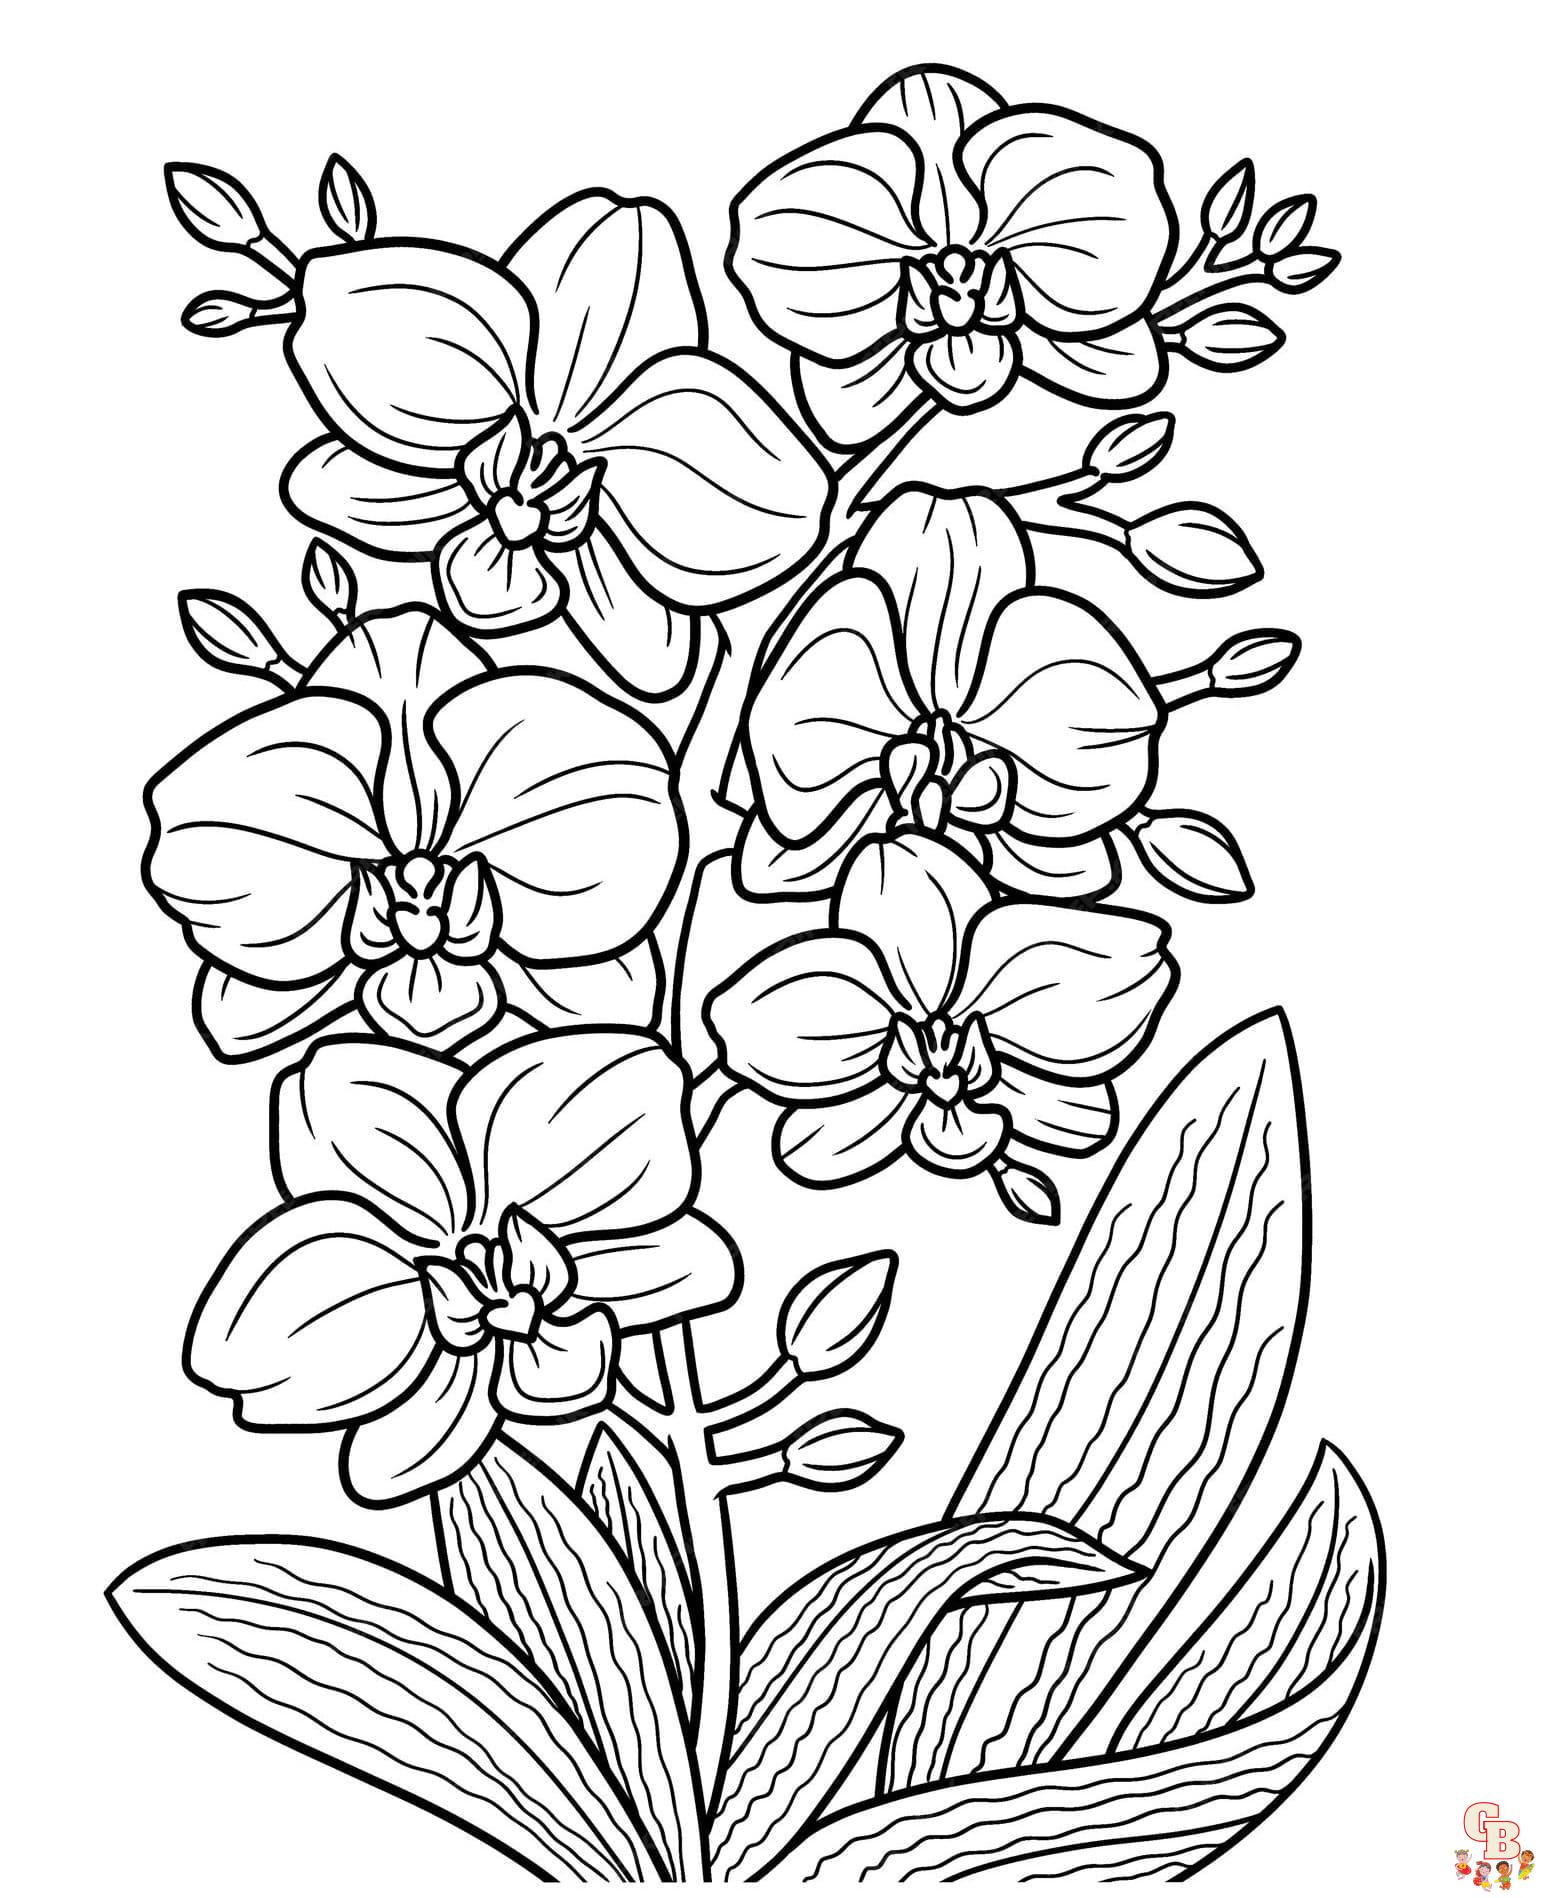 Printable orchid coloring pages free for kids and adults